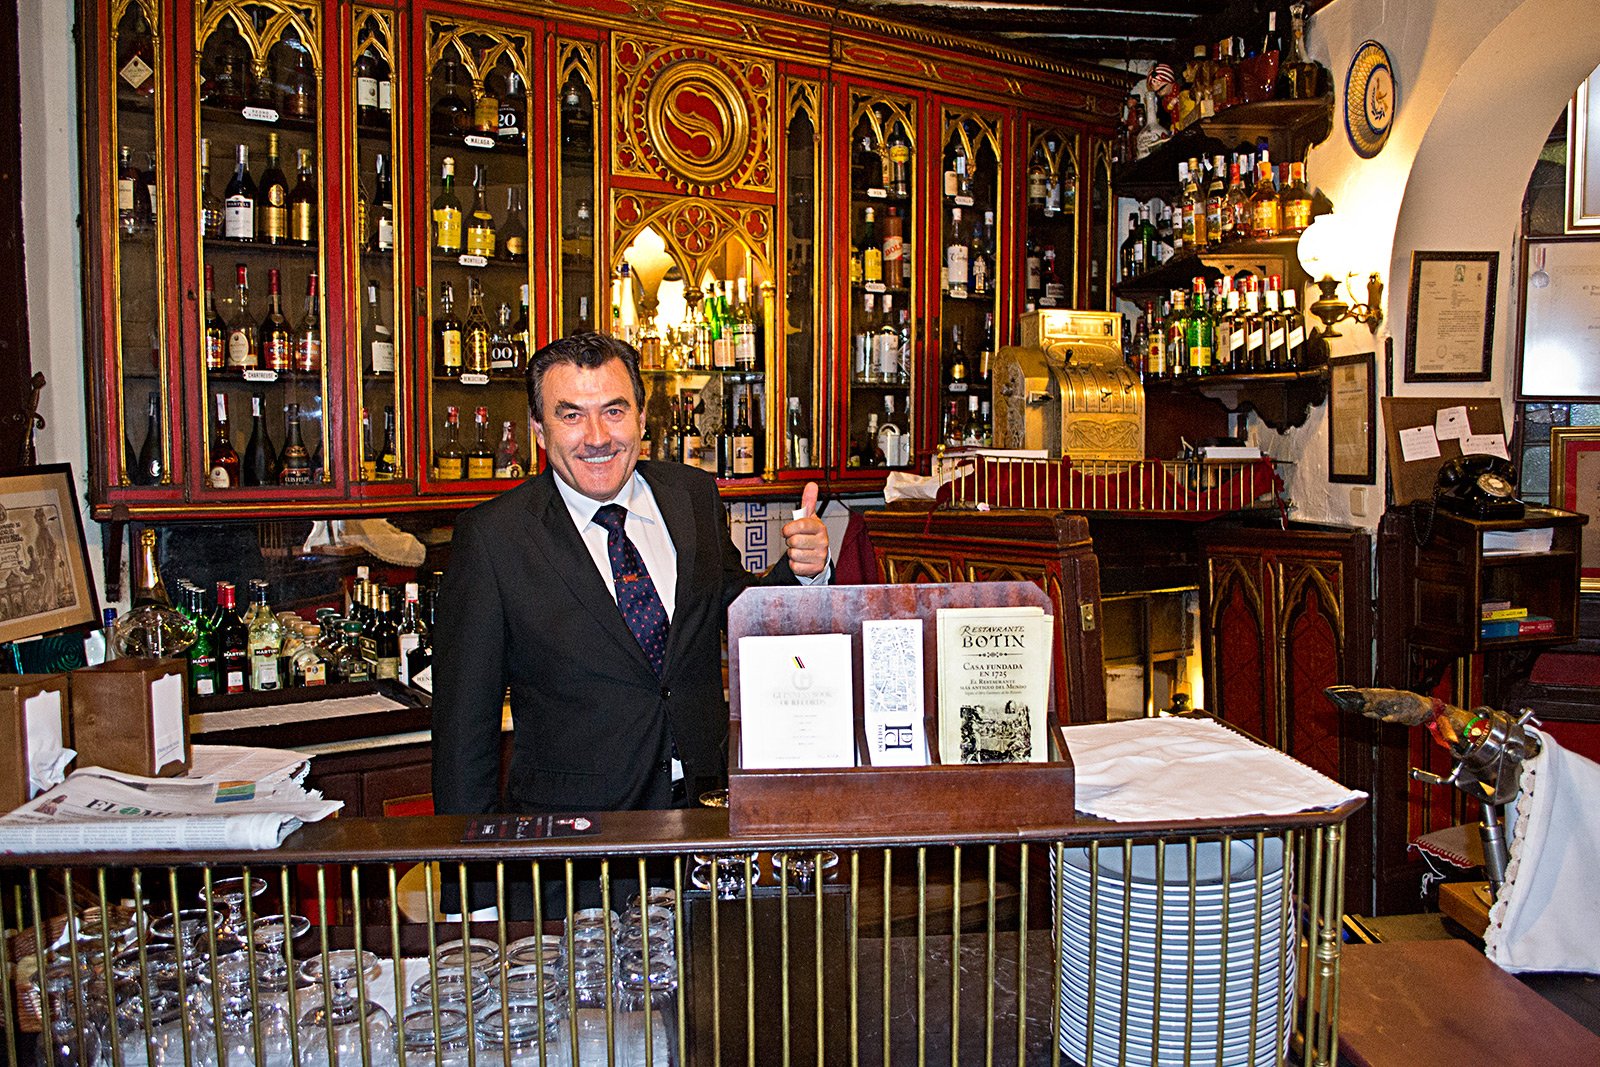 How to have a dinner in the oldest restaurant in the world in Madrid